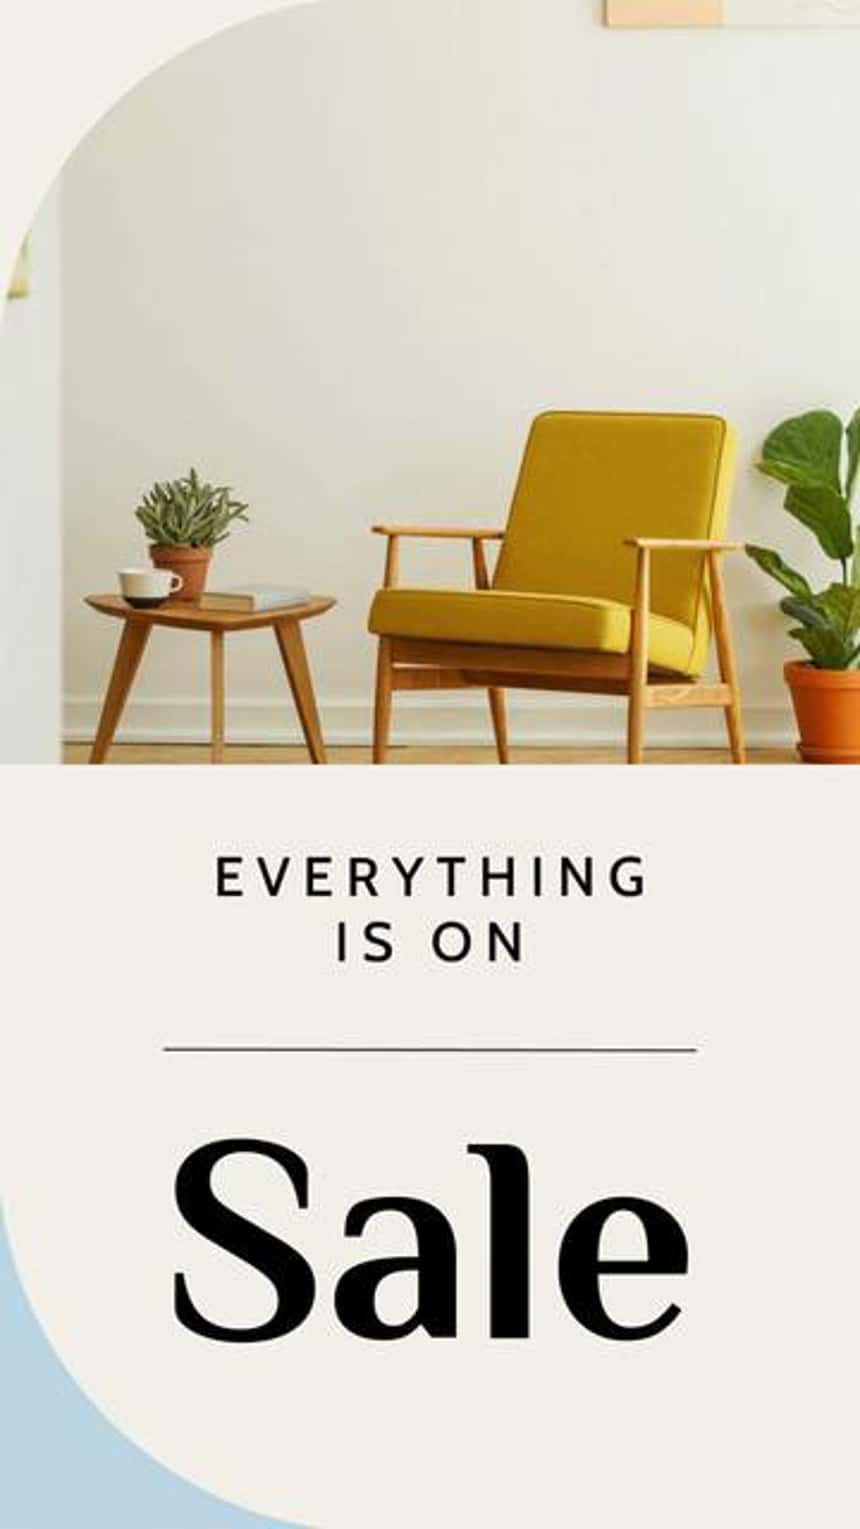 Instagram video ad template for a furniture business featuring an image of a yellow chair, plants, and side table. Text on image reads \